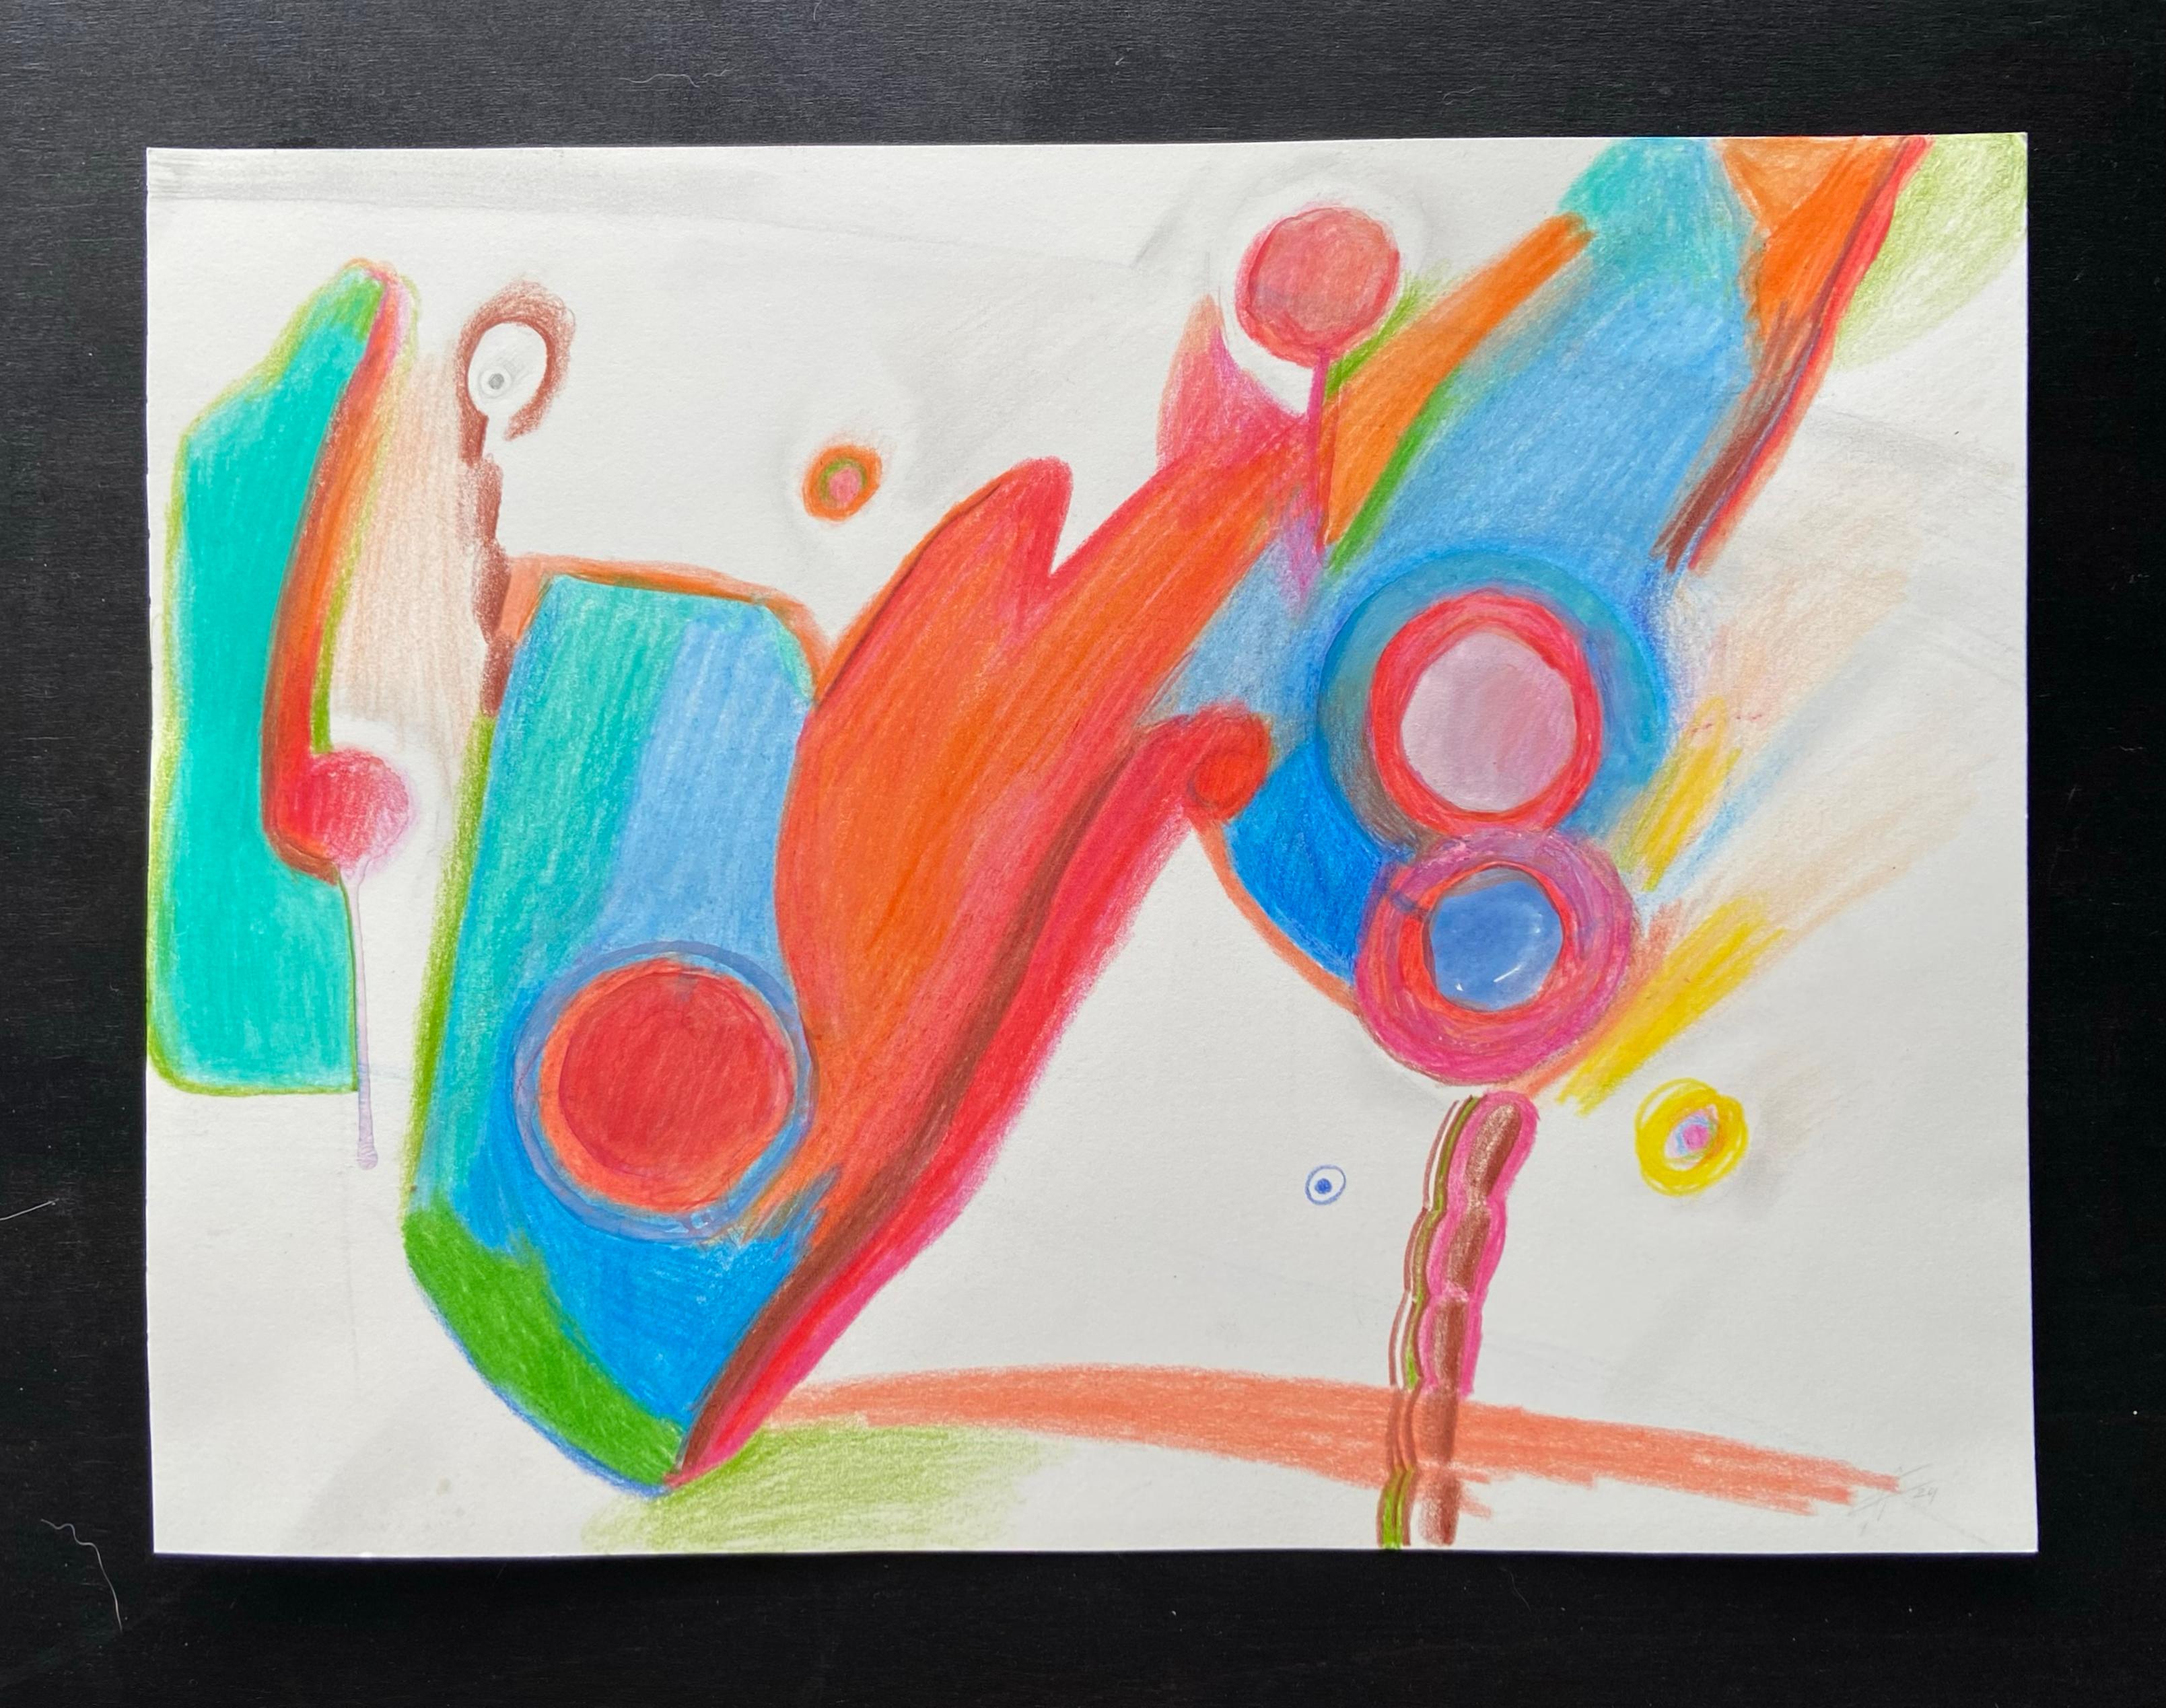 artist: Anastasia Kurakina
abstract expressionist colour pencil drawing on paper
one of a kind
hand signed


Anastasia dialogues with the chromatic material which she lets flow freely onto the support, touching the most intimate strings of the